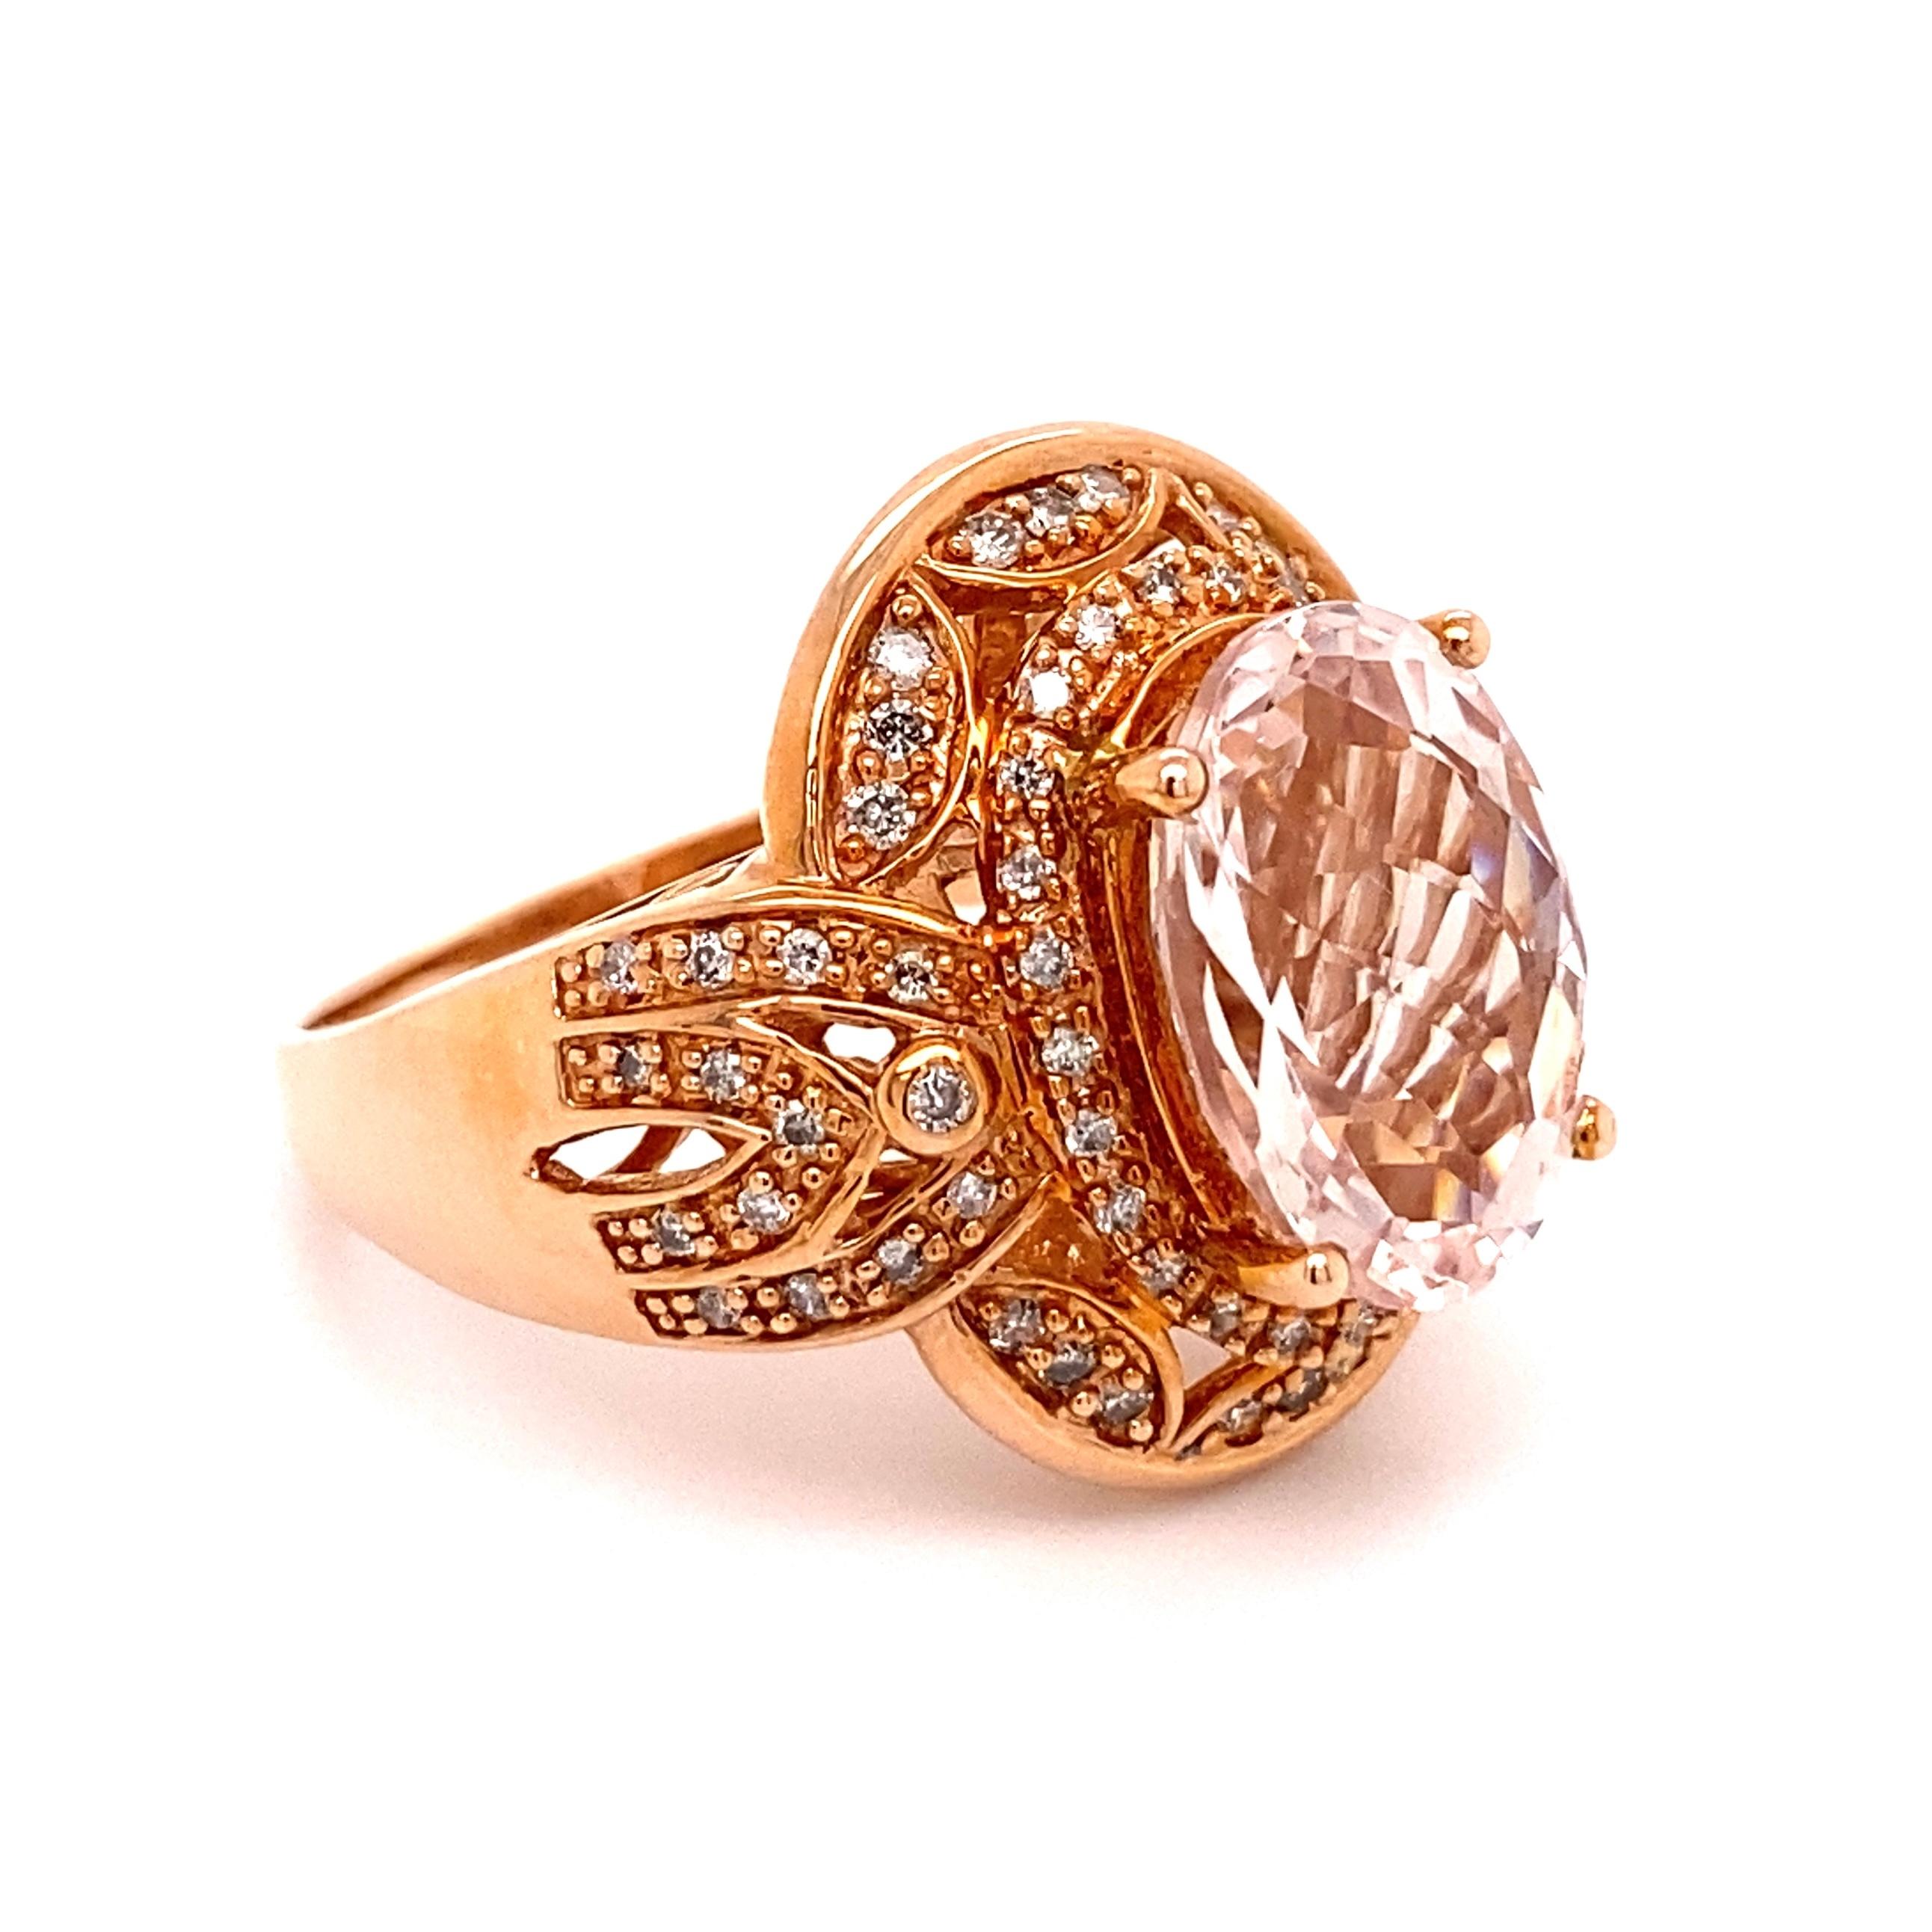 Simply Beautiful! Finely detailed Morganite and Diamond Gold Cocktail Ring. Centering a Hand set securely nestled 7 Carat Oval Morganite, surrounded by Diamonds, weighing approx. 0.38tcw including sides and on shank. Artfully Hand crafted in 14K